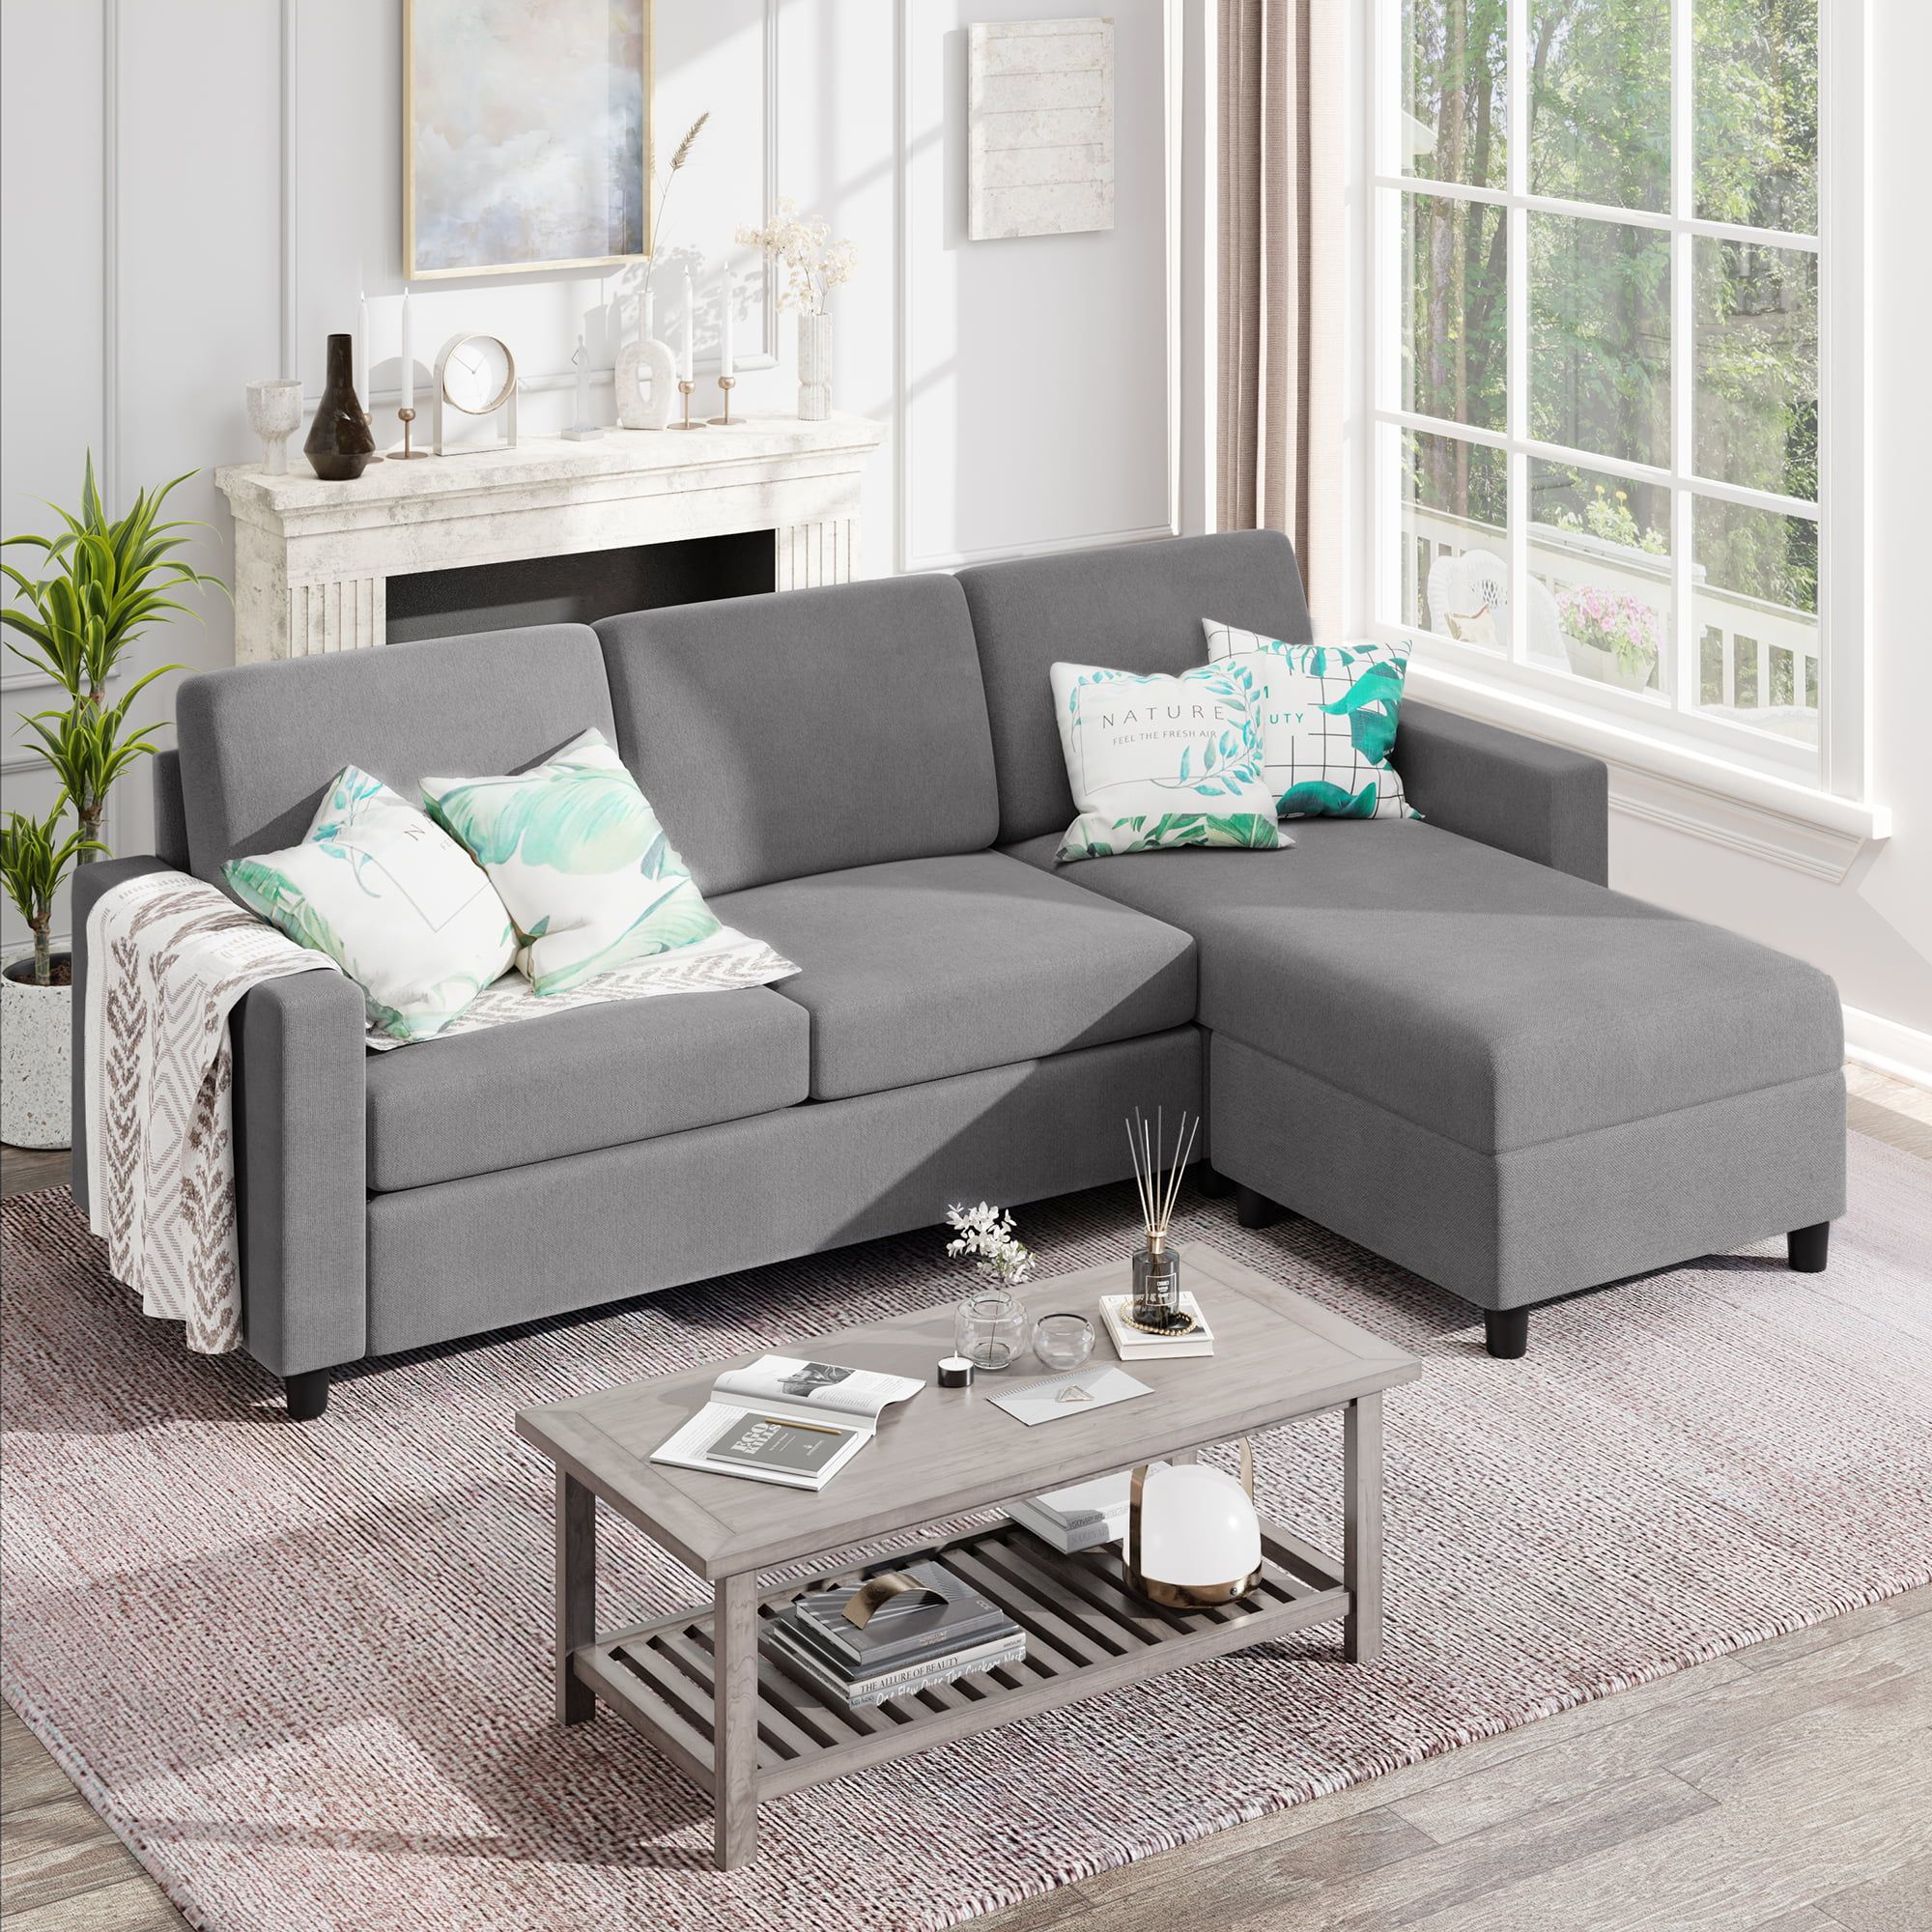 Sobaniilo Convertible Sectional Sofa Couch, Modern Linen Fabric L Shaped  3 Seat Sofa Sectional With Reversible Chaise For Small Space (dark Gray) –  Walmart Throughout Modern Fabric L Shapped Sofas (View 7 of 20)